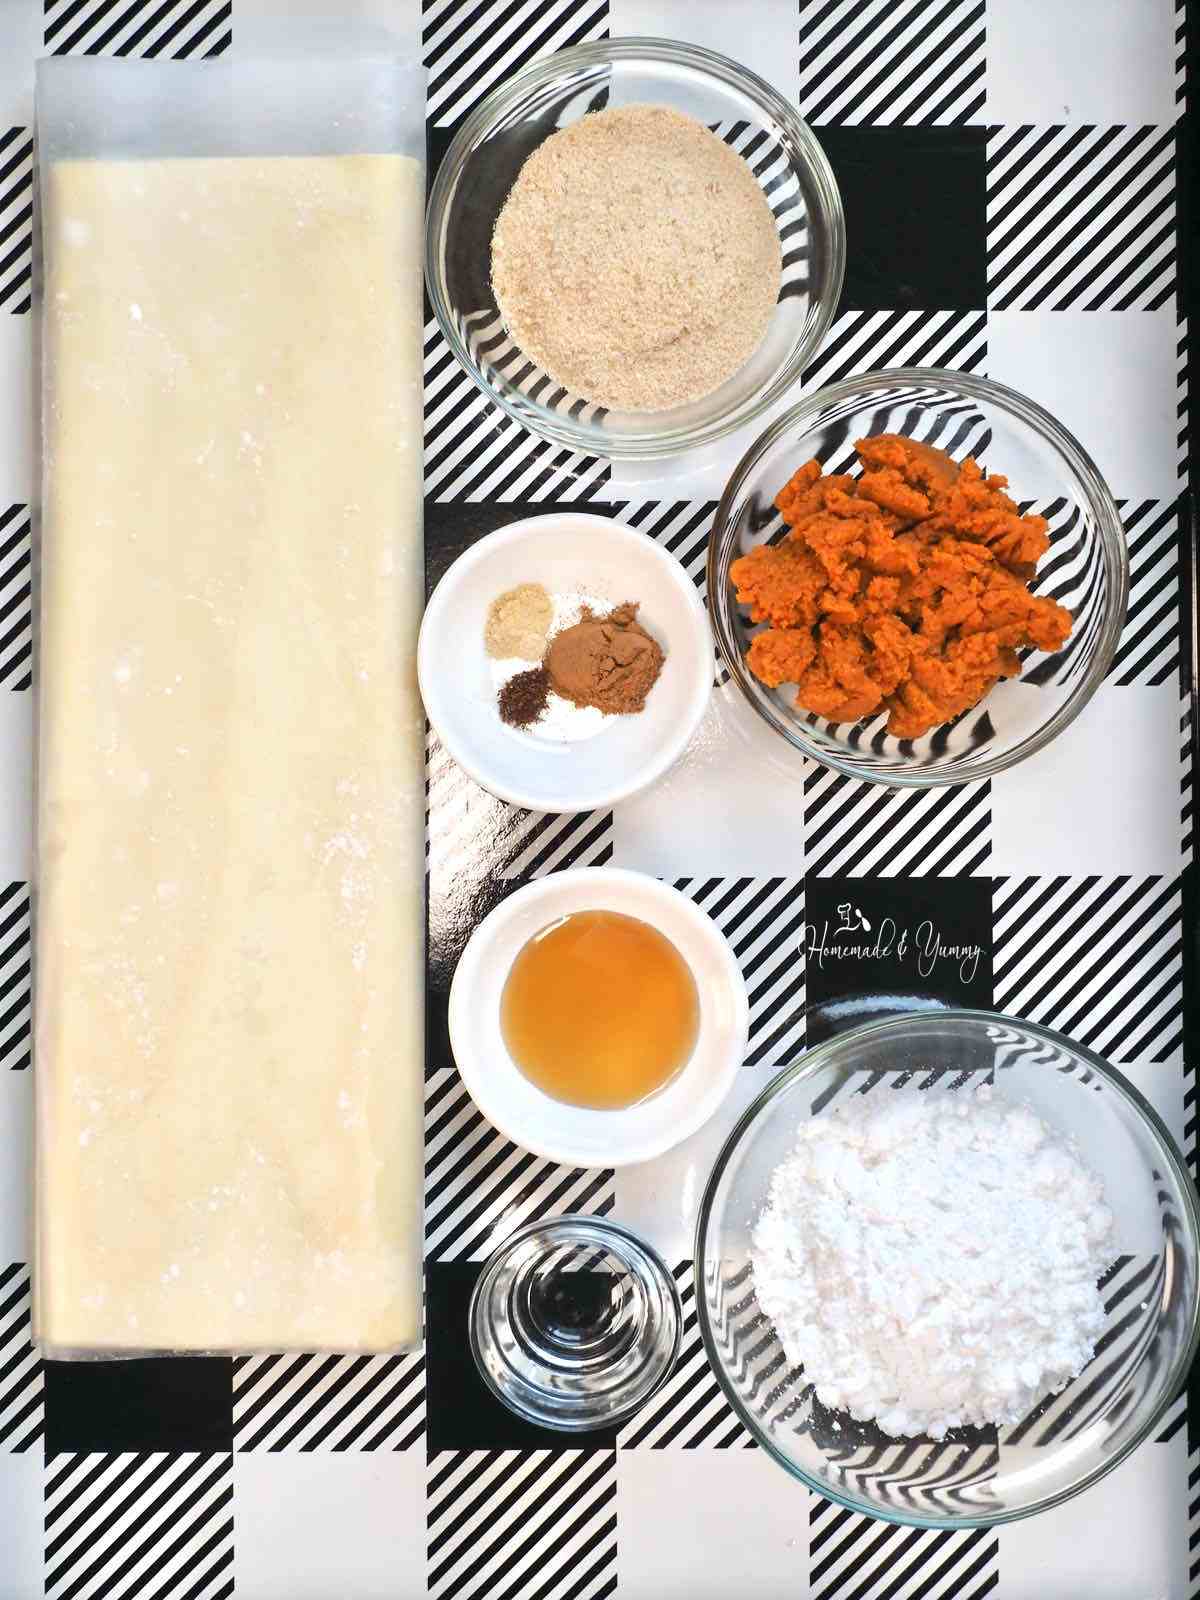 Ingredients to make pumpkin rolls with puff pastry.